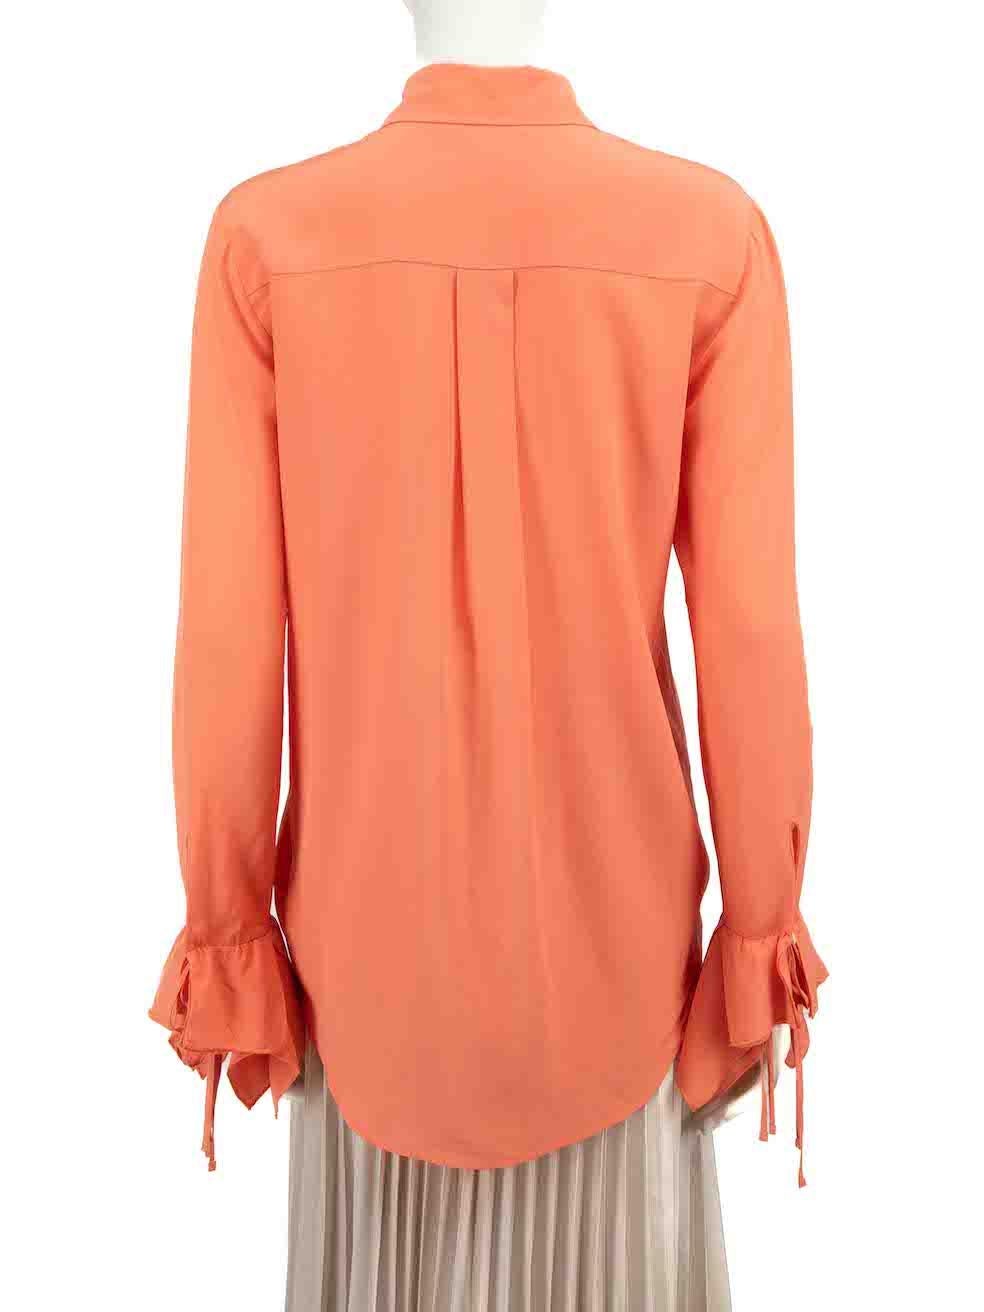 Victoria Beckham VVB Coral Silk Button Down Blouse Size S In Good Condition For Sale In London, GB